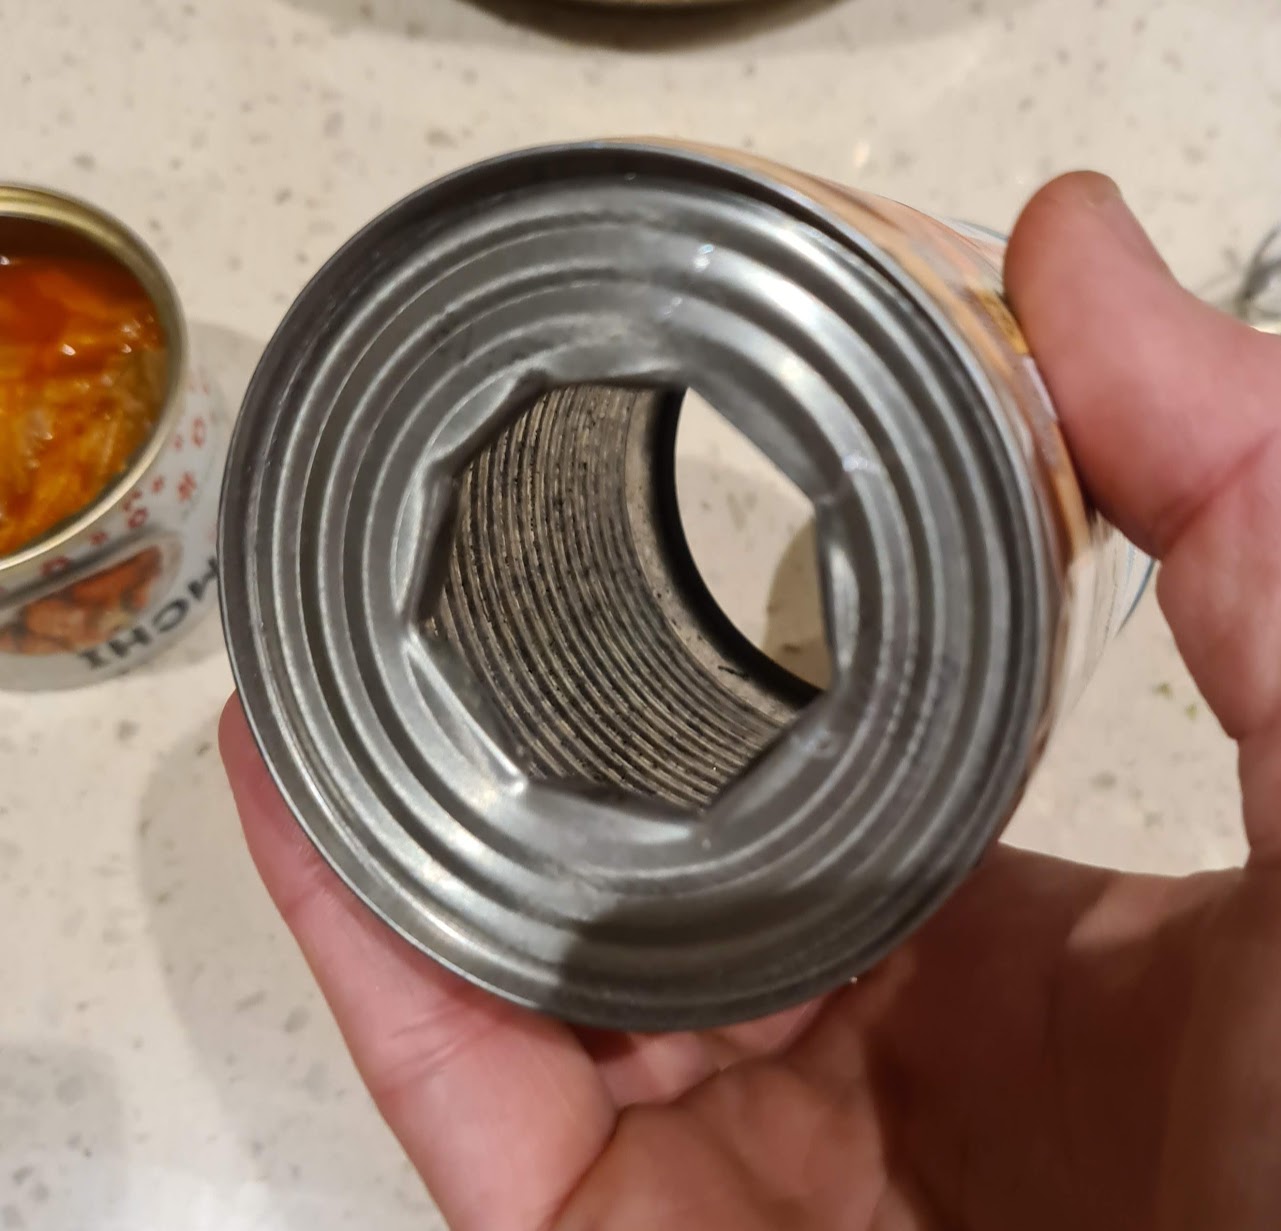 hole in can